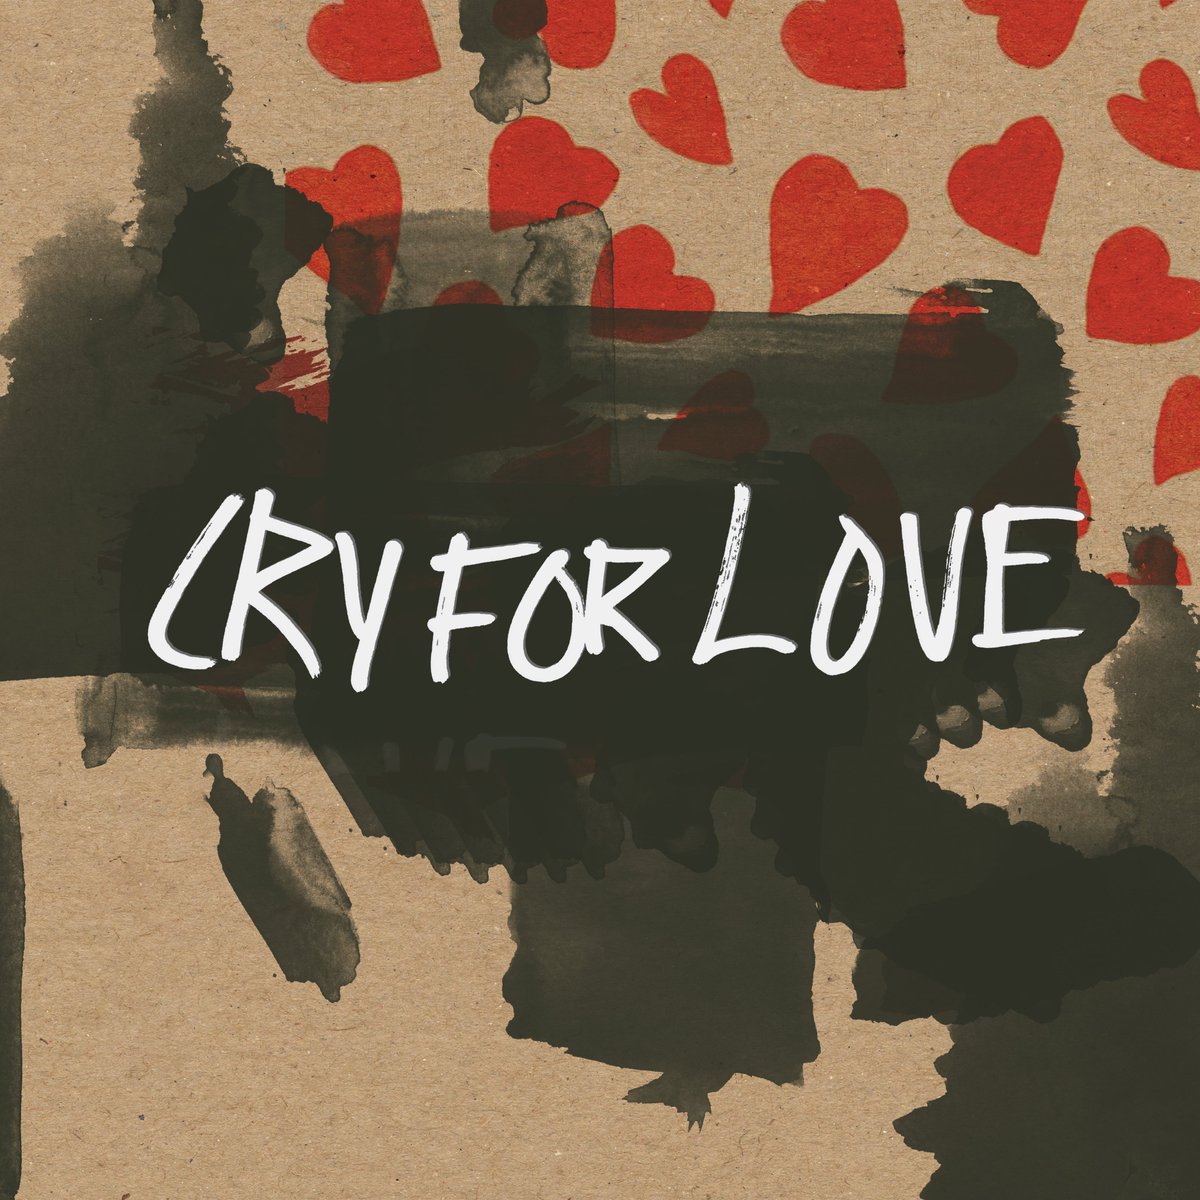 Rising DJ & Producer Riordan has just dropped his new highly anticipated track 'Cry For Love' after racking up millions of plays on TikTok🔥 Stream the track now on all platforms.